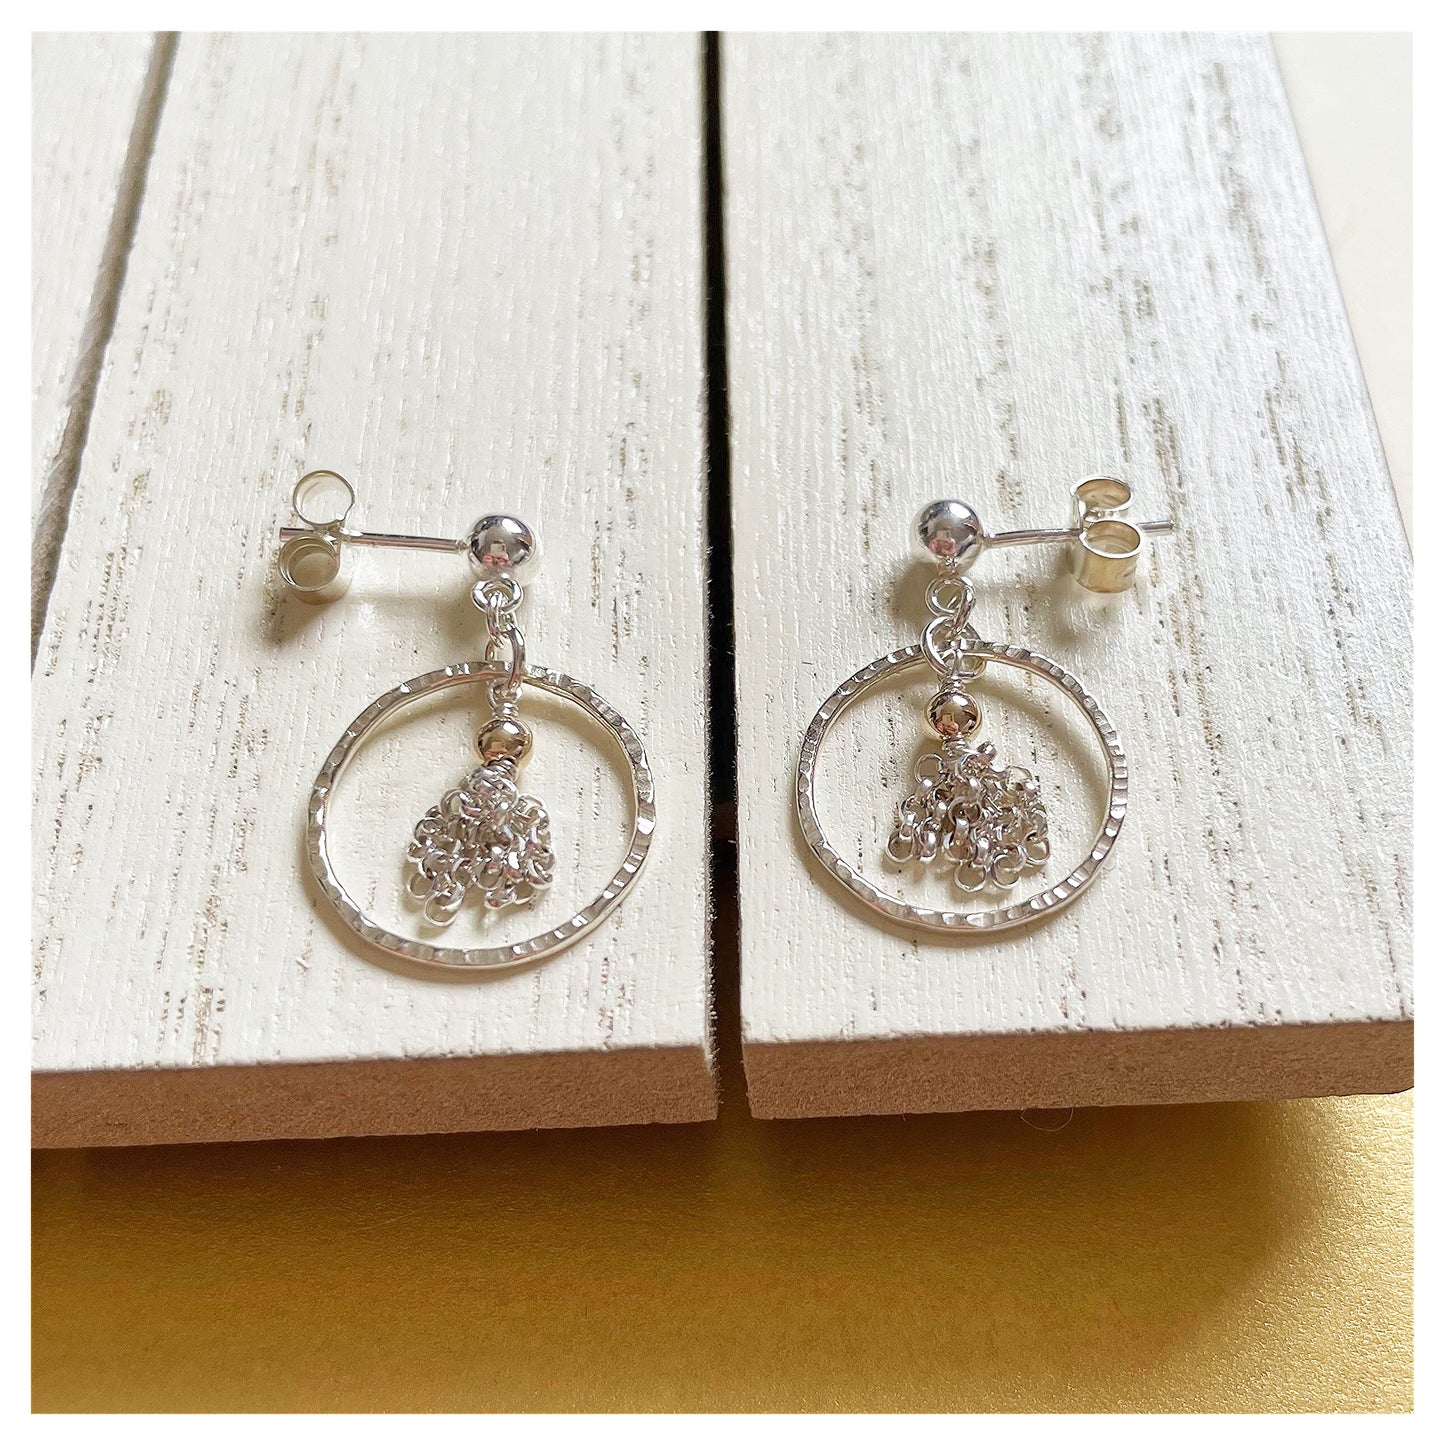 Mini Sterling Silver and 9ct Yellow Gold Hammered Circle and Tassel Drop Stud Earrings.